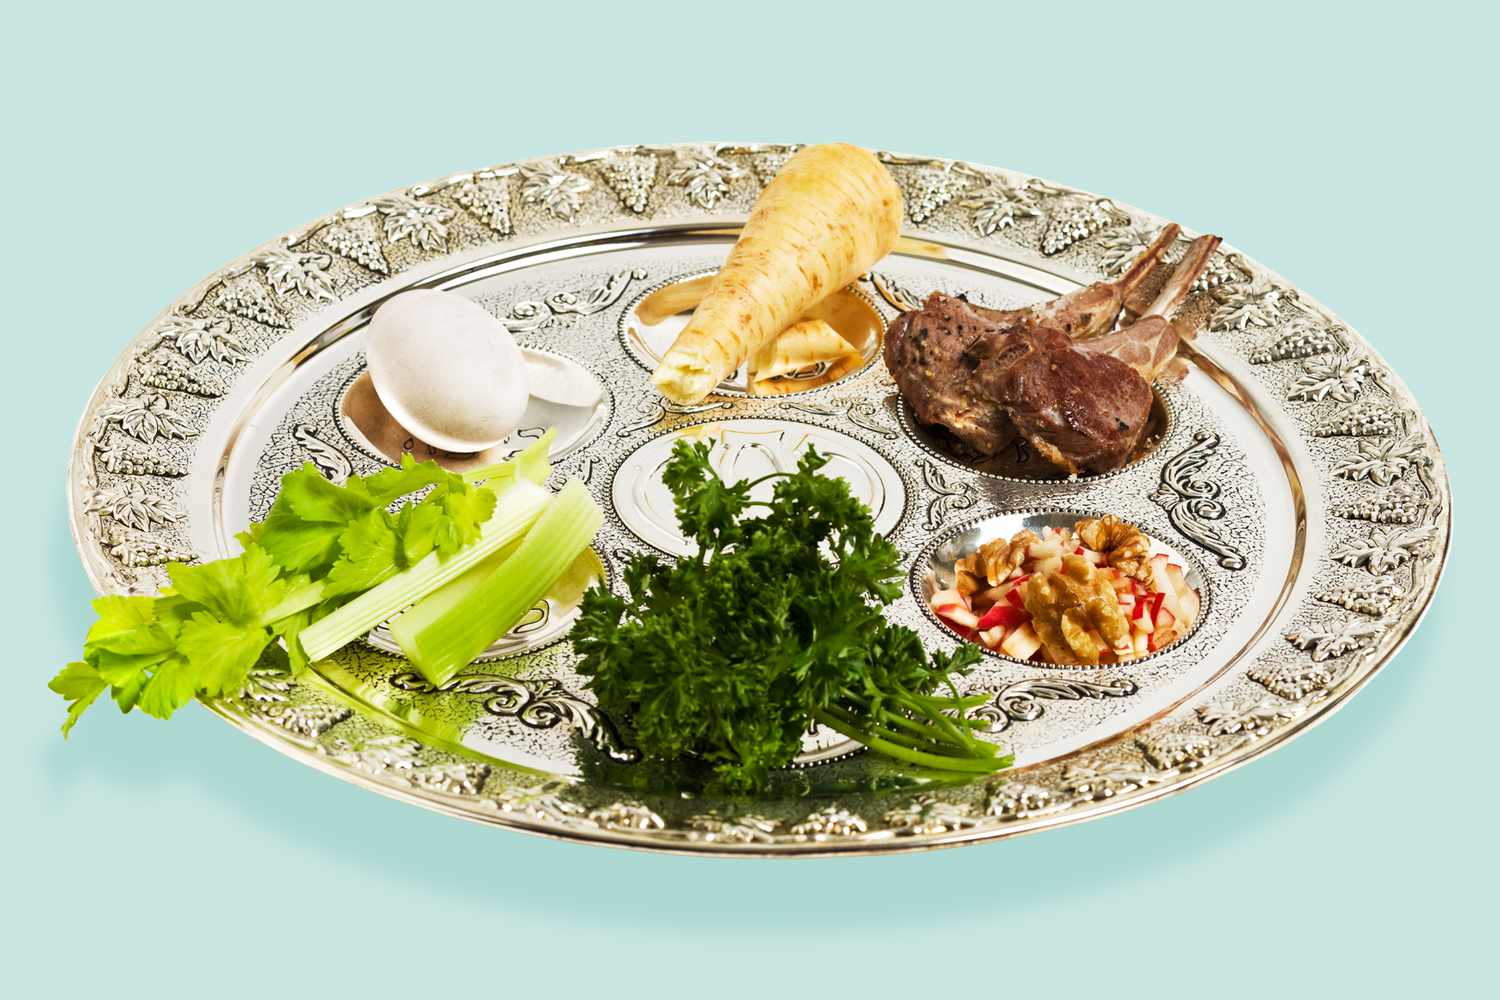 Passover Sader plate on a blue background